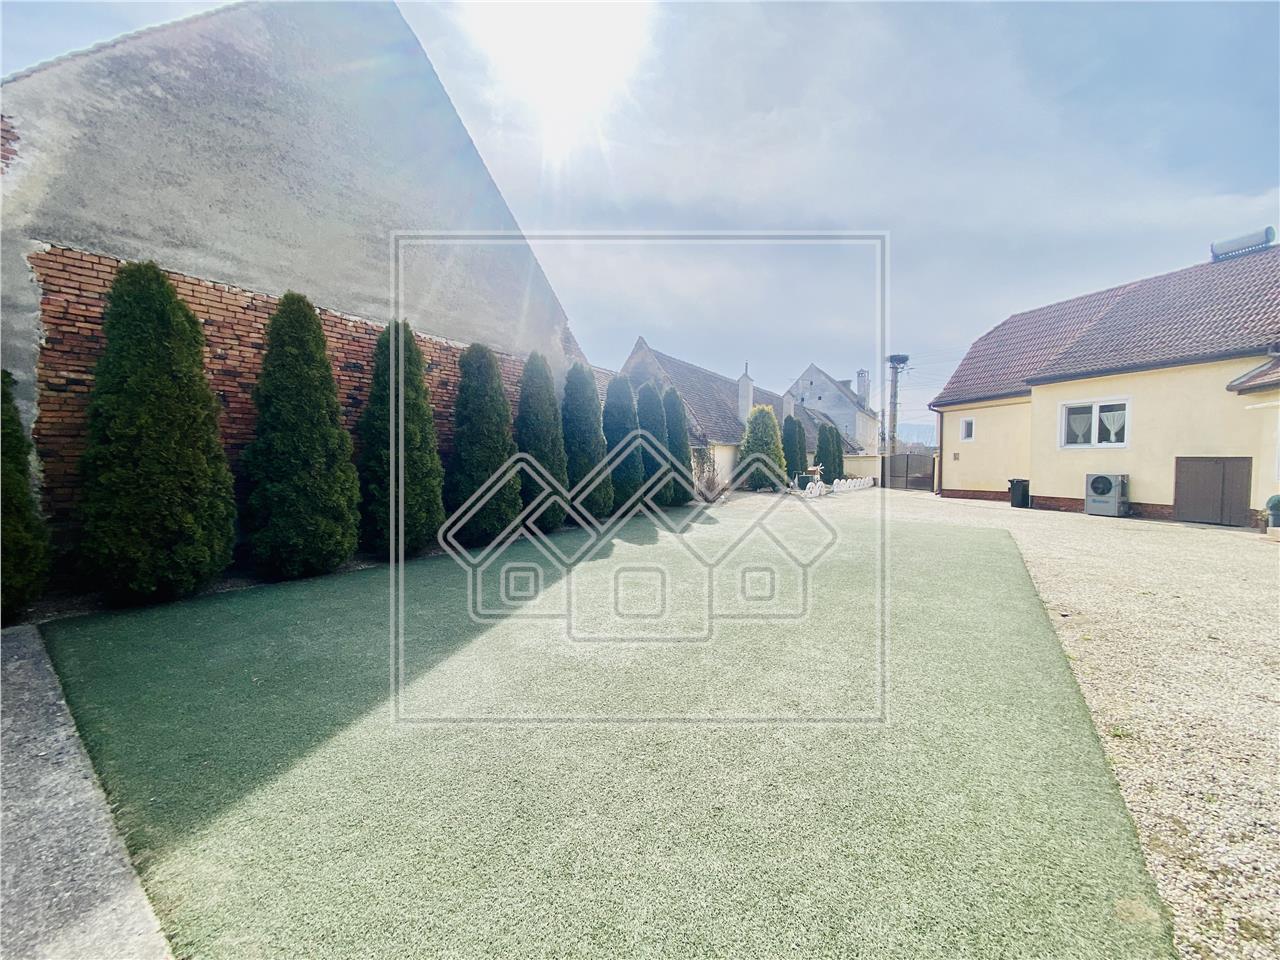 House for sale in Sibiu - individual - 1300 sqm land - Cristian